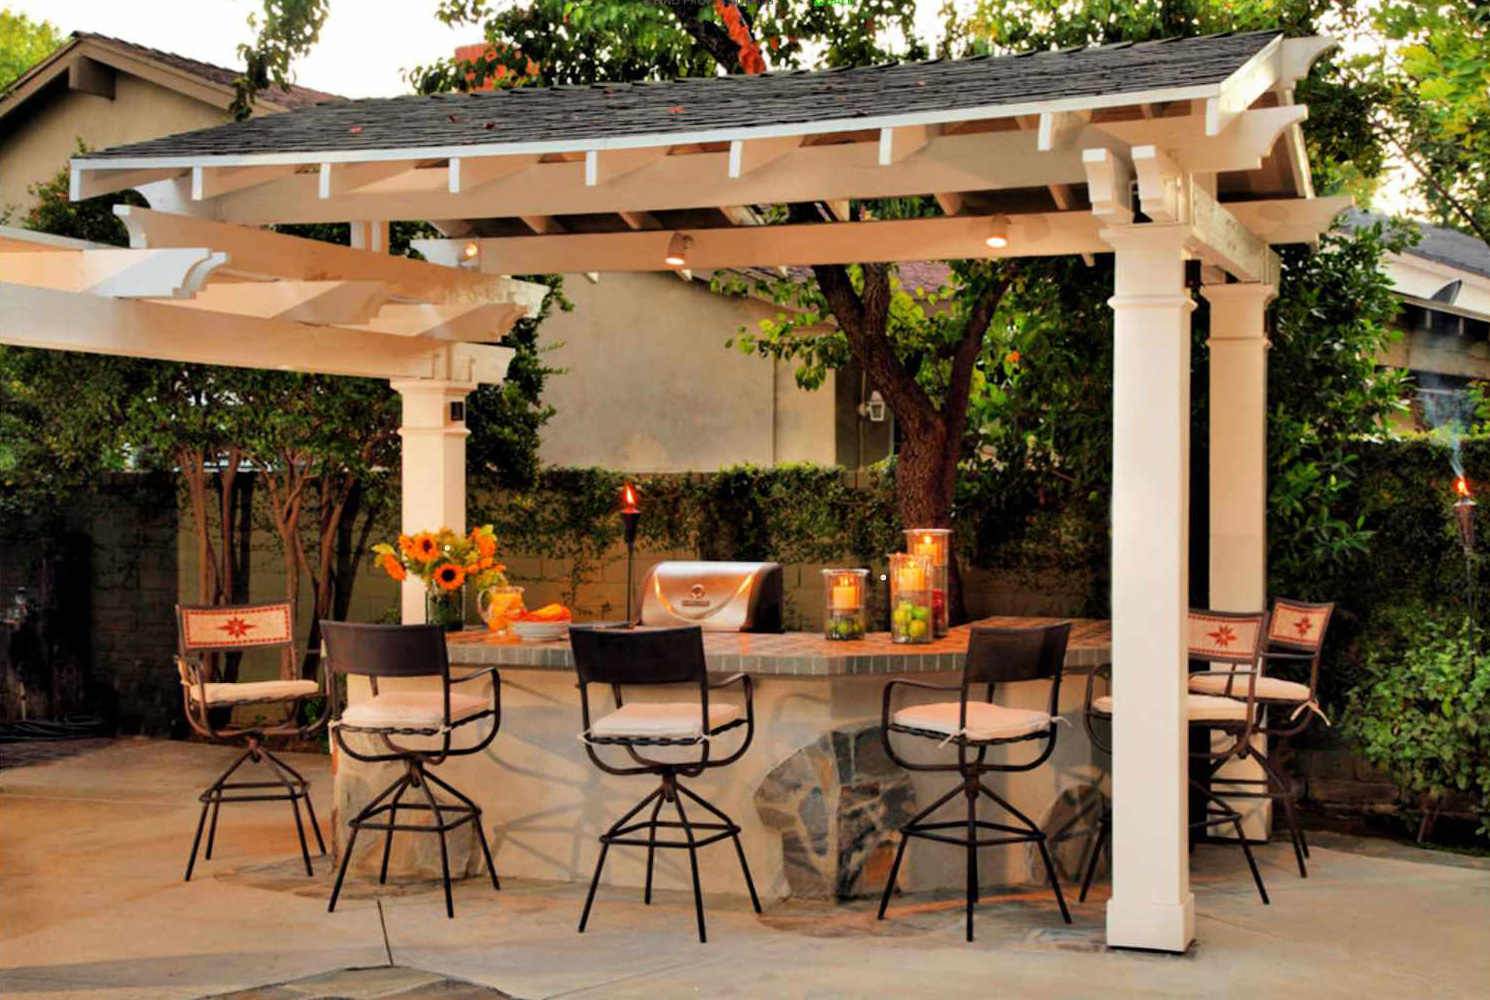 A roofed outdoor bar